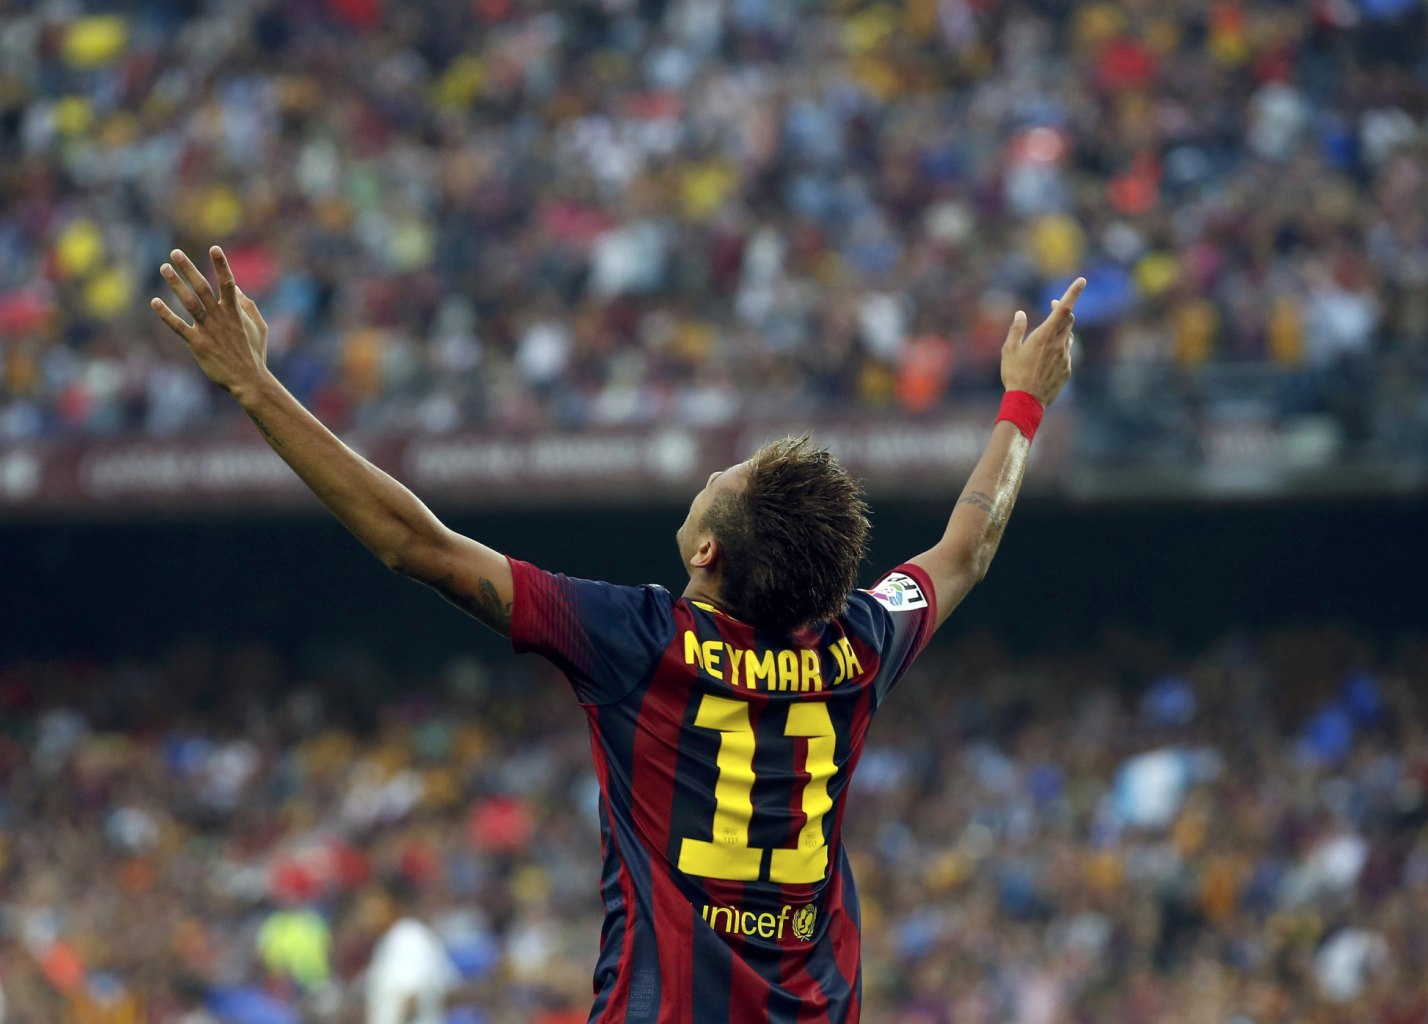 Neymar raising his two hands to the air, after scoring against Real Madrid